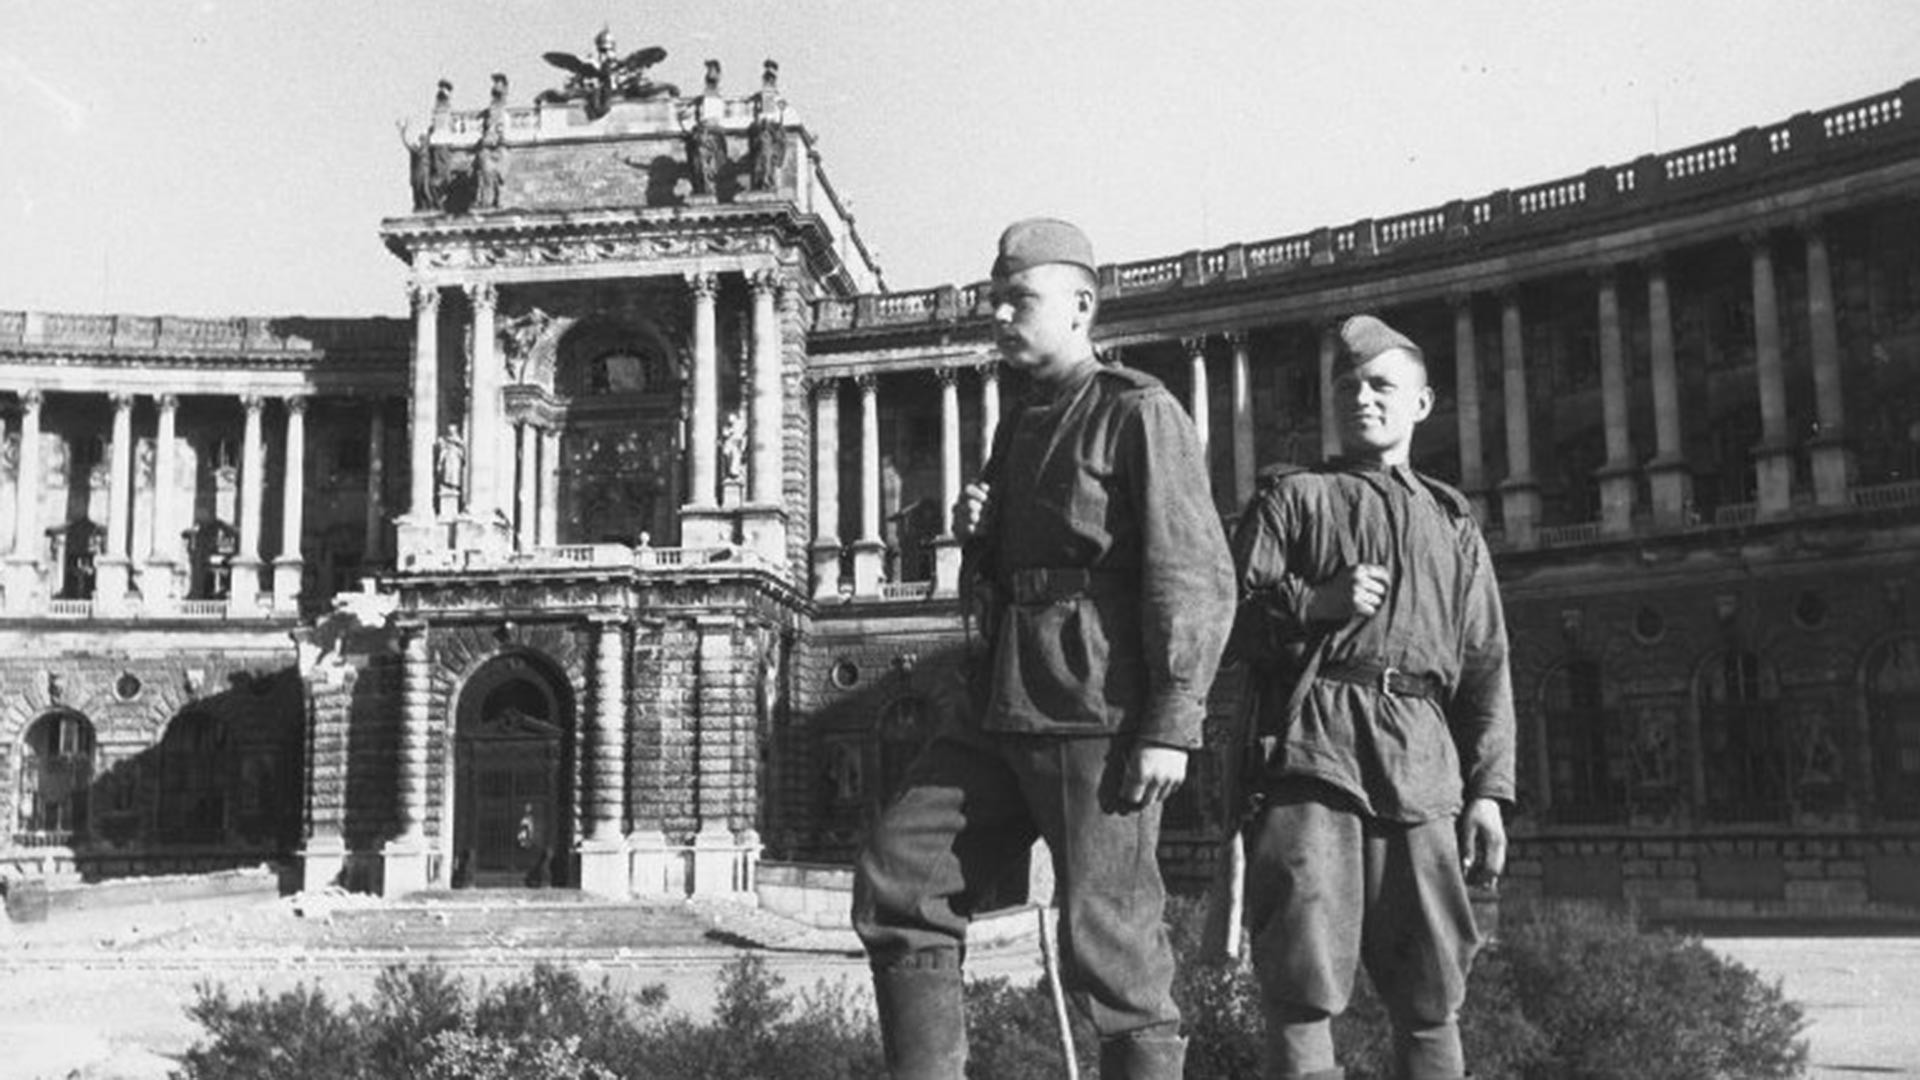 Soviet soldiers correspondents in front of Hofburg palace